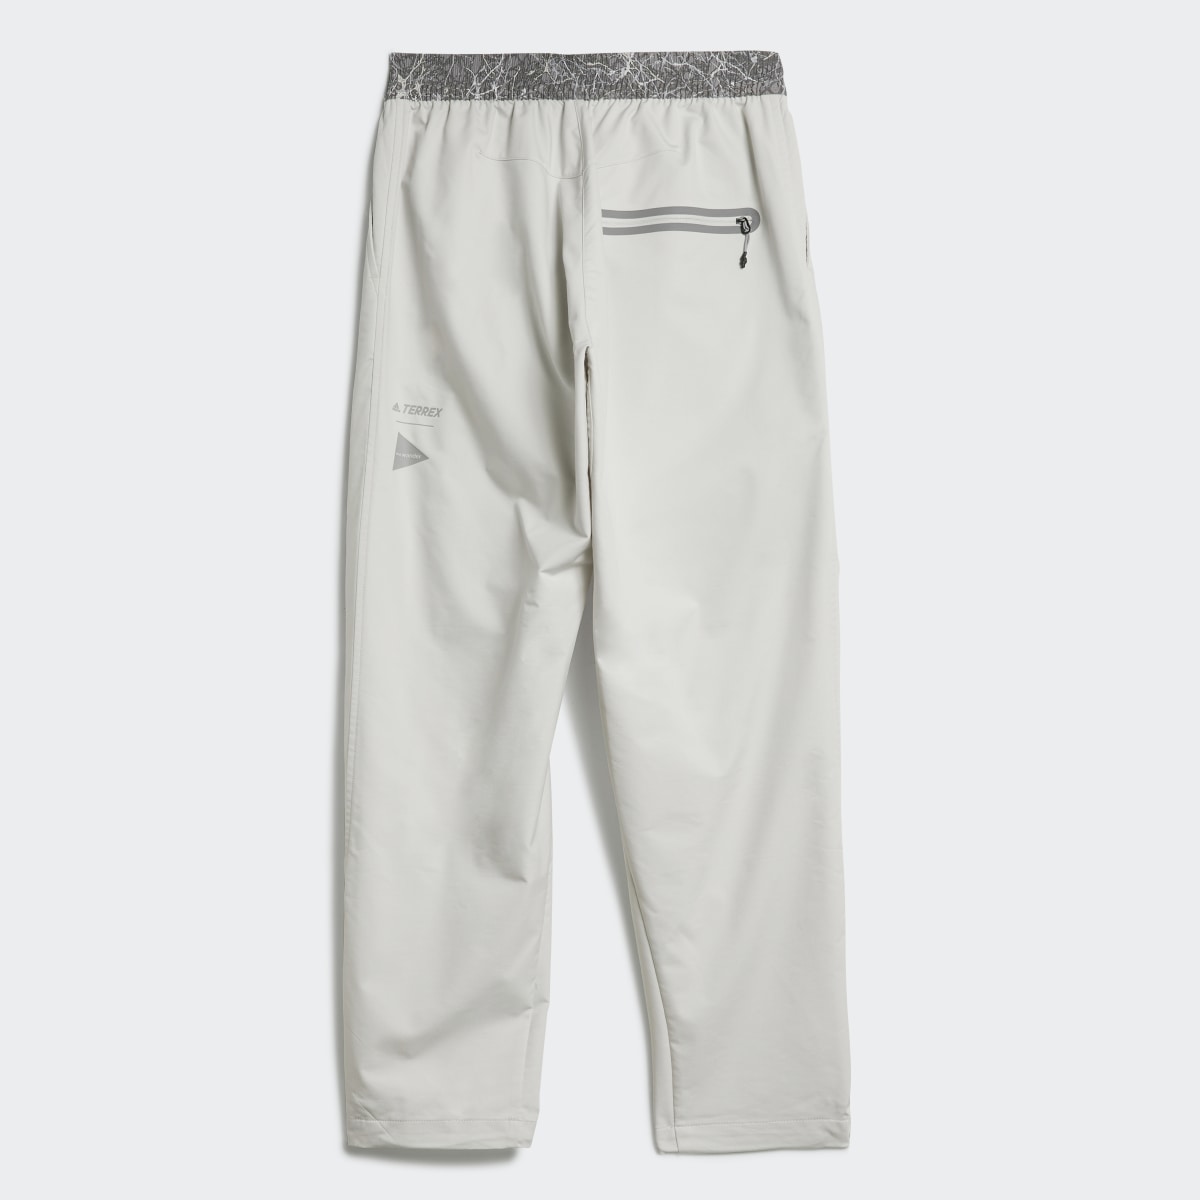 Adidas Terrex x and wander Trousers. 5